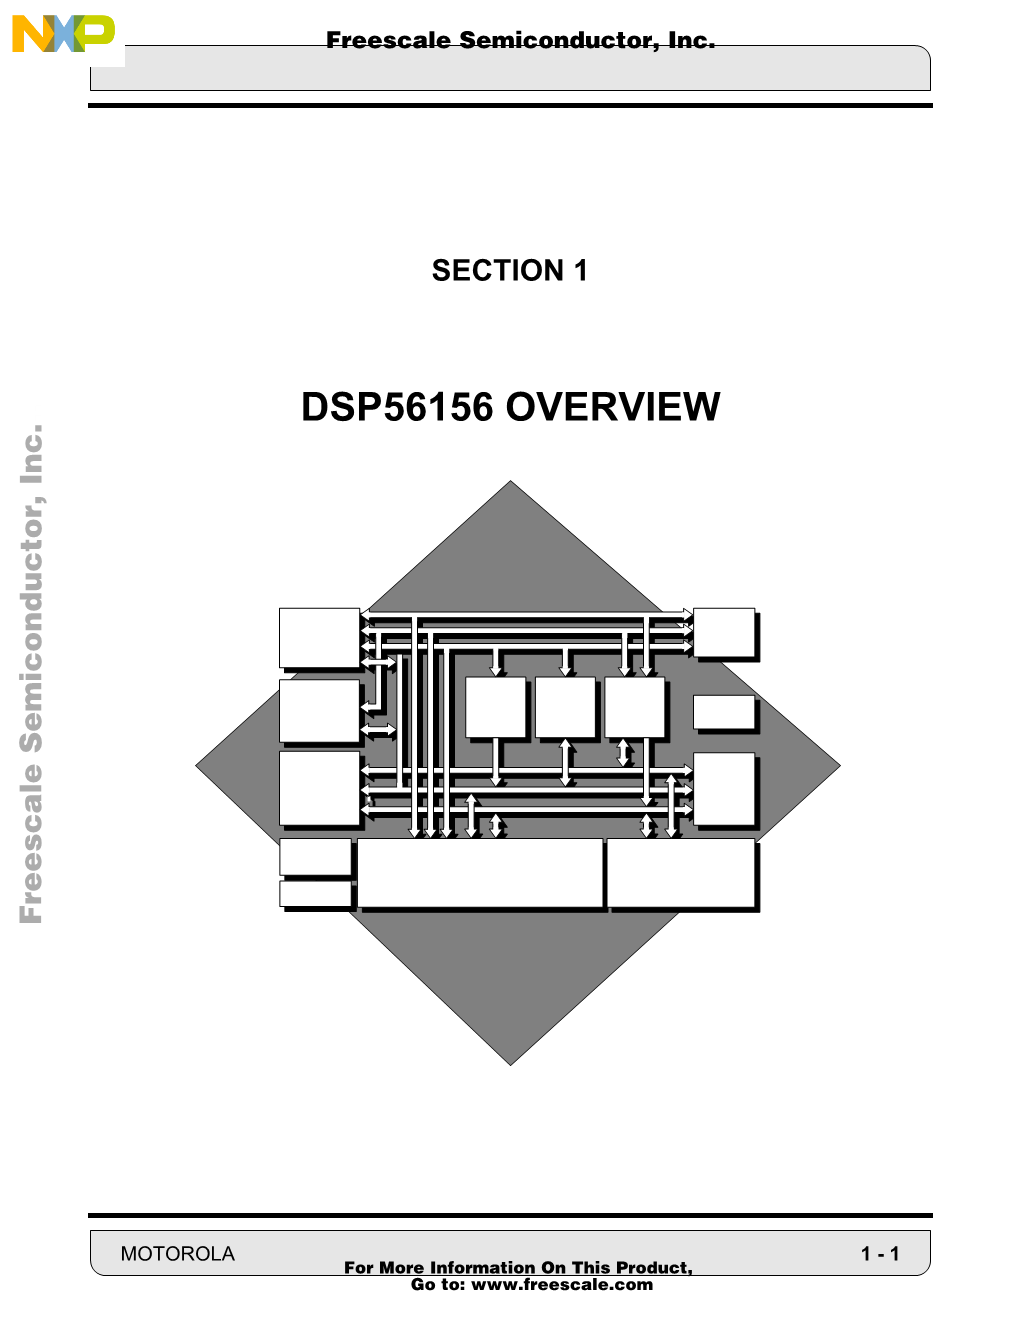 Dsp56156 Overview